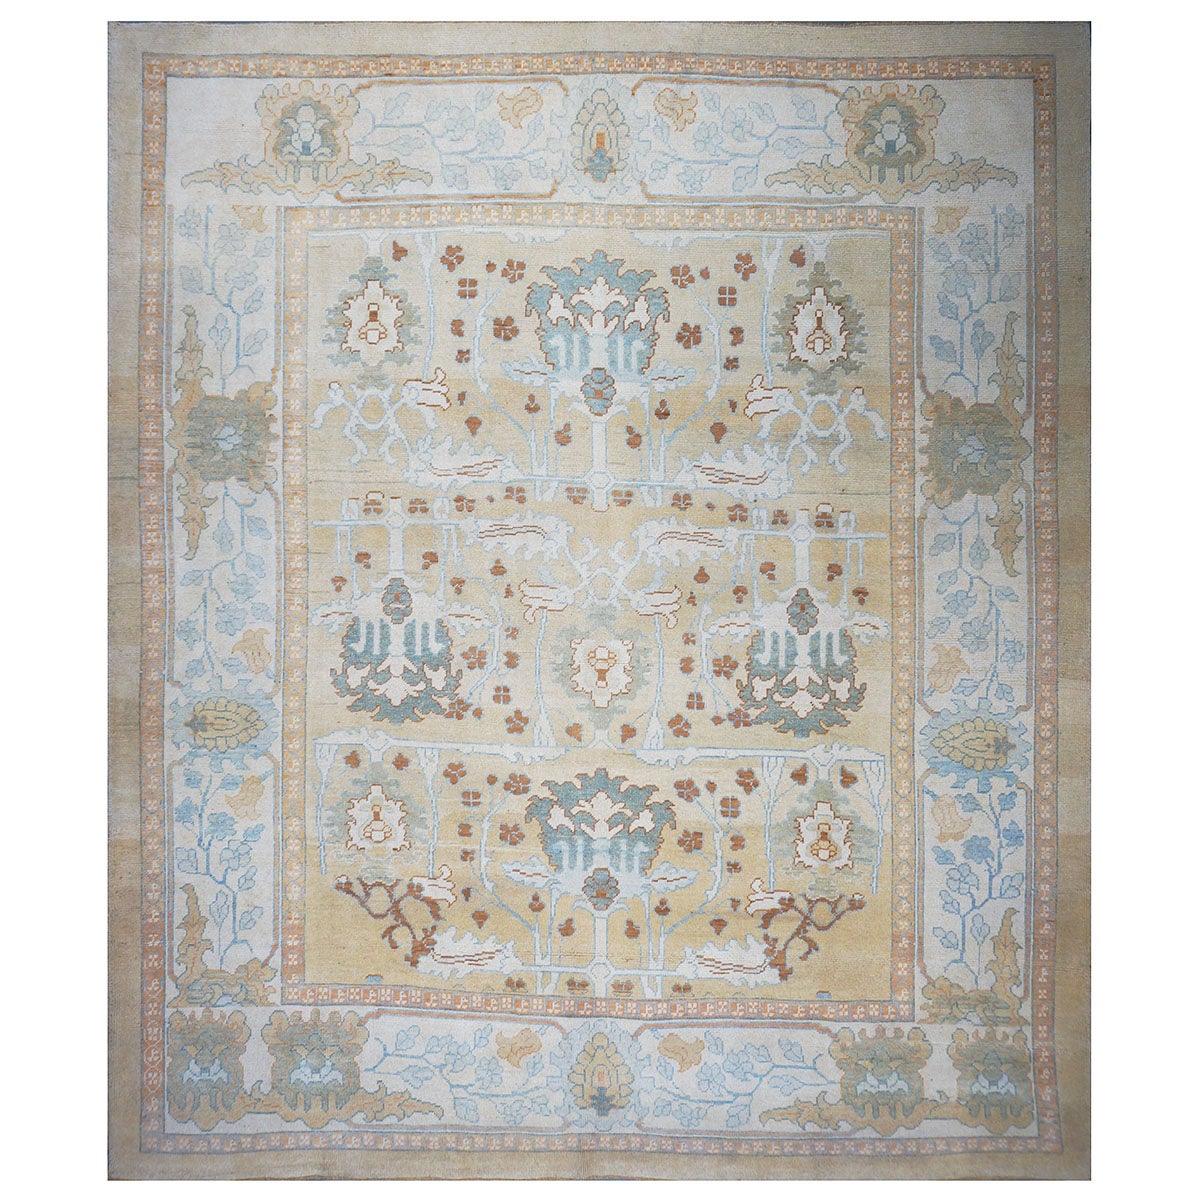 21st Century Turkish Donegal Carpet 11x14 Tan, Blue, & Ivory Area Rug For Sale